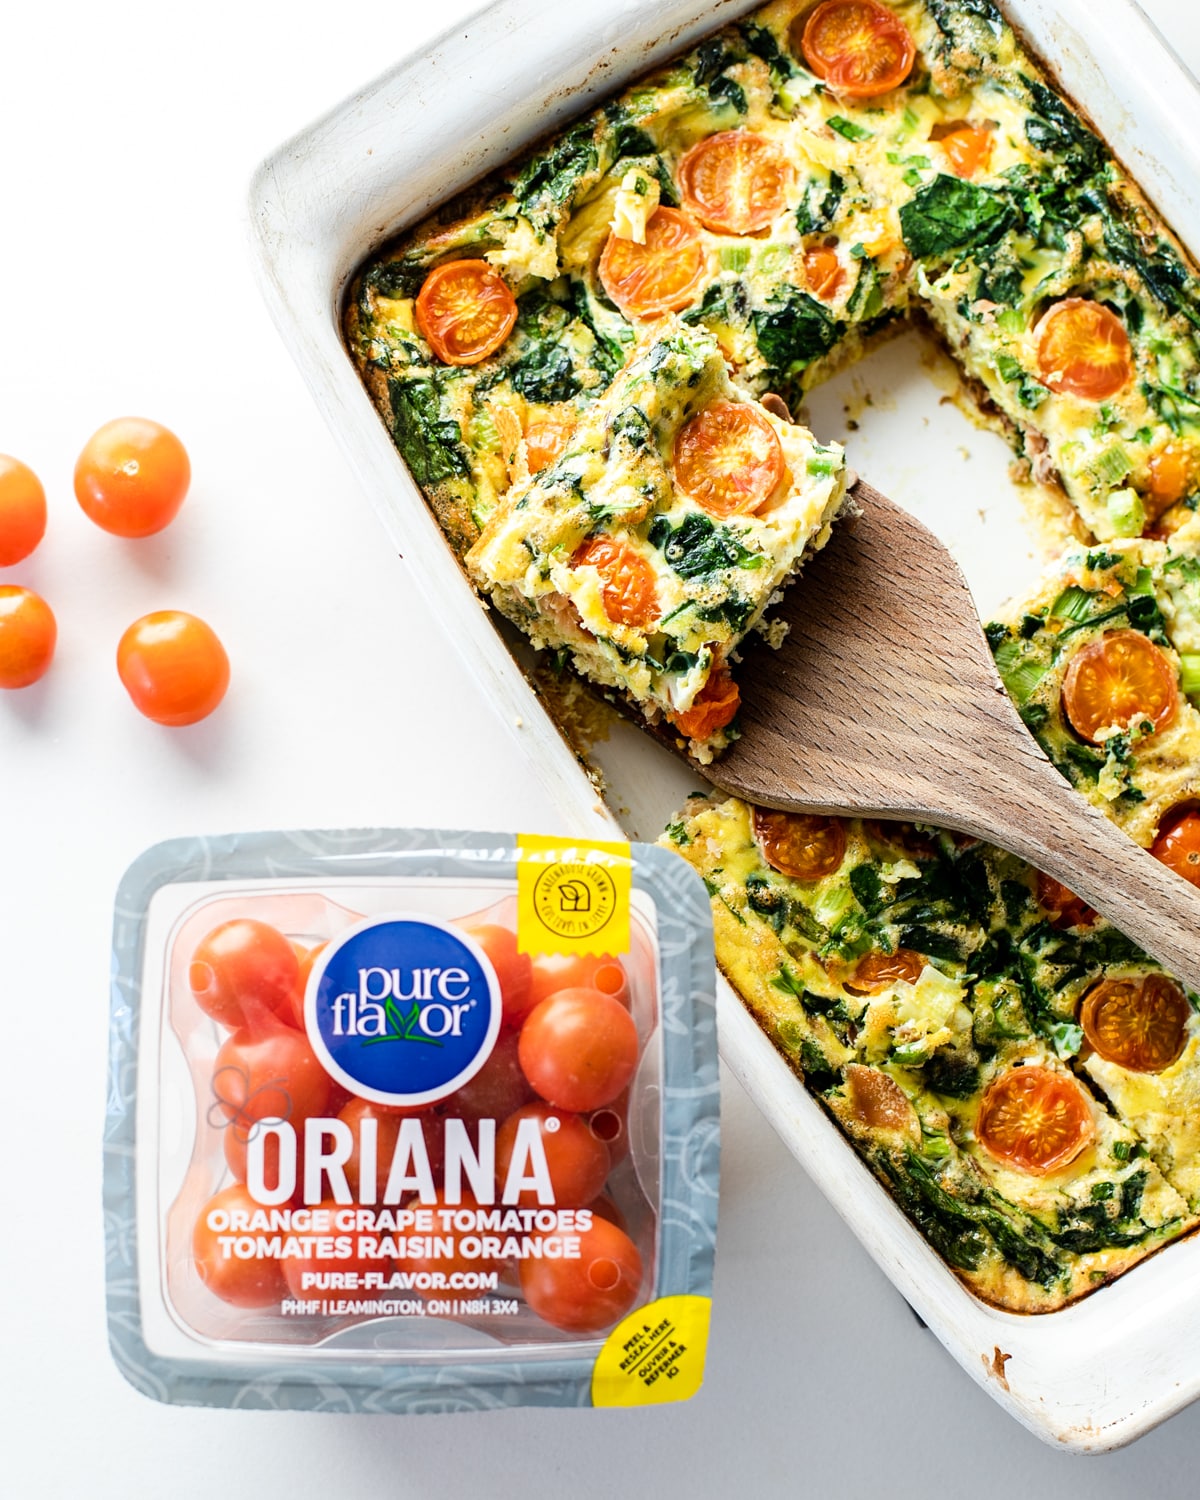 Smoked Salmon Breakfast Casserole with Tomatoes and Spinach